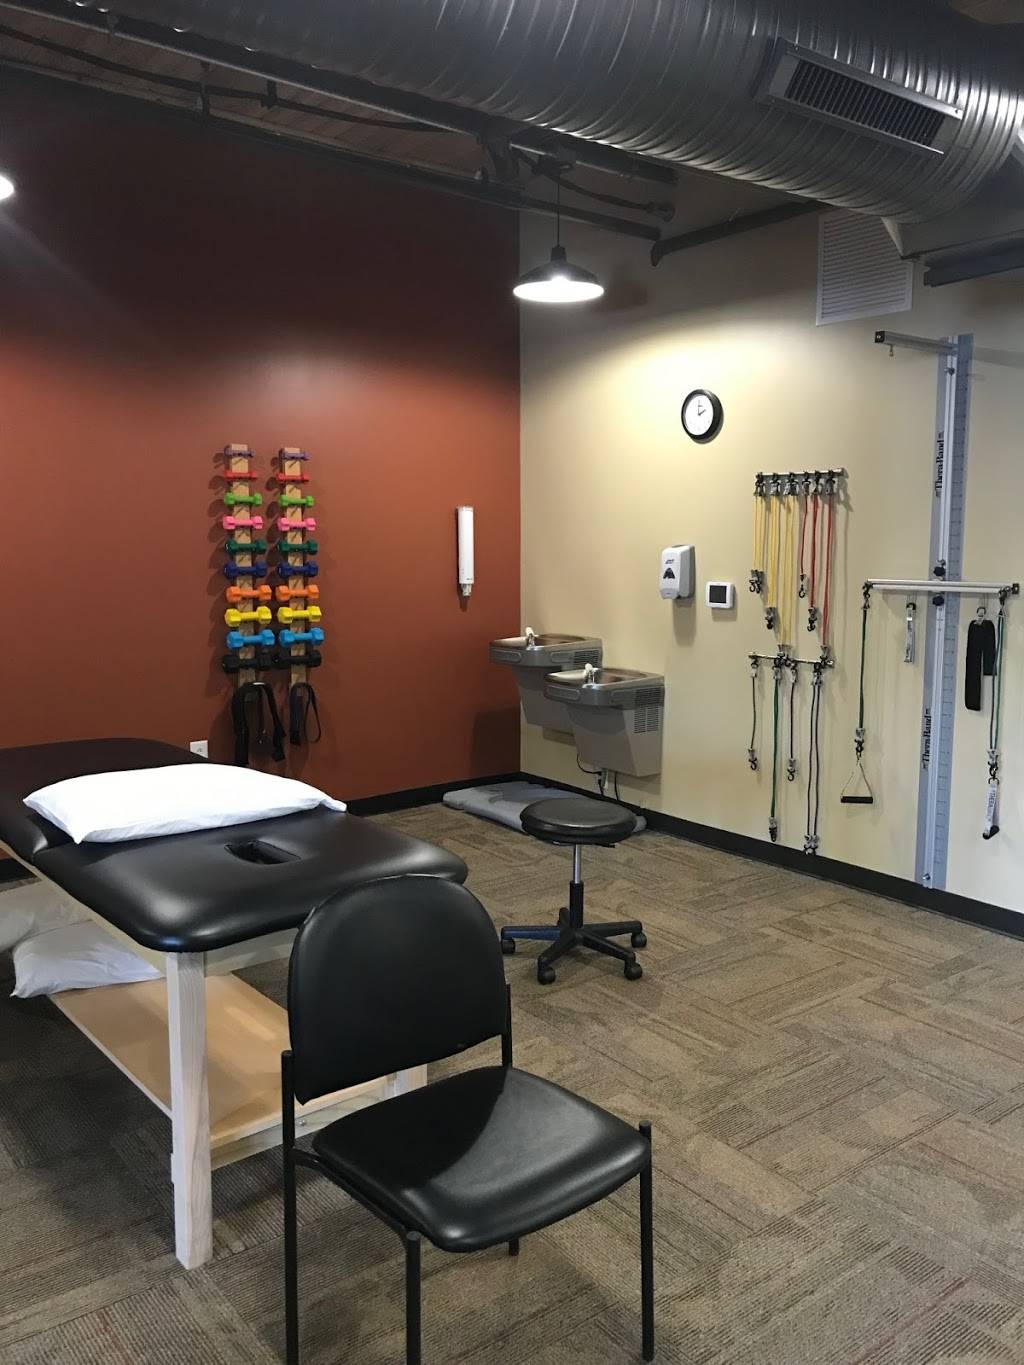 BenchMark Physical Therapy | 2230 Park Rd Ste 104, Charlotte, NC 28203, USA | Phone: (704) 919-1280